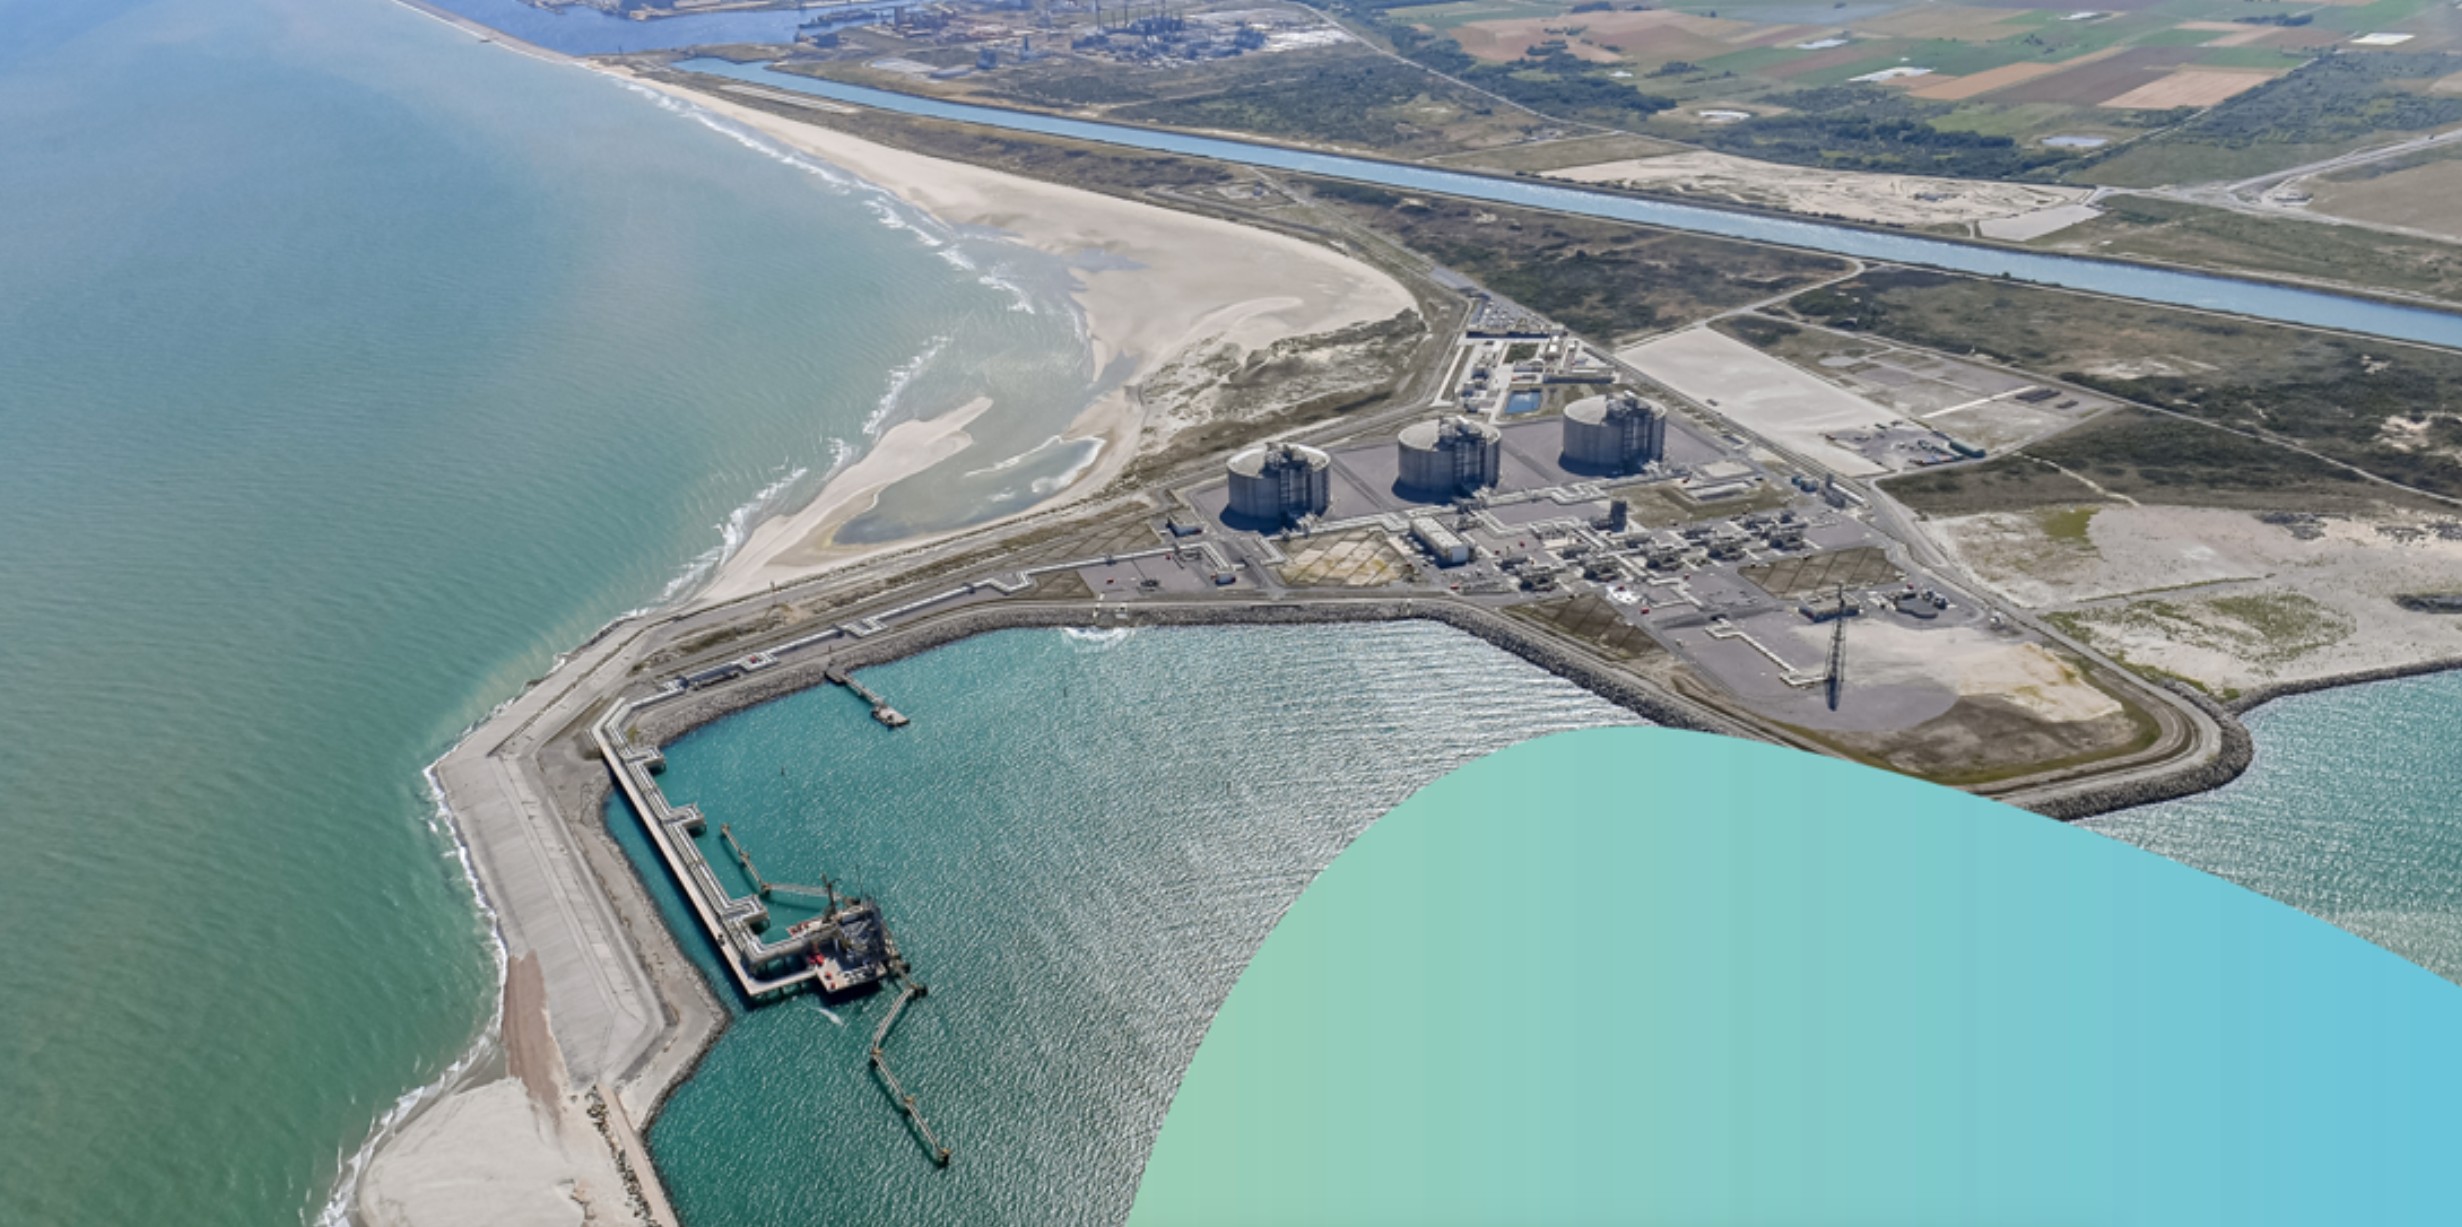 France’s Dunkirk LNG terminal offers regas capacity